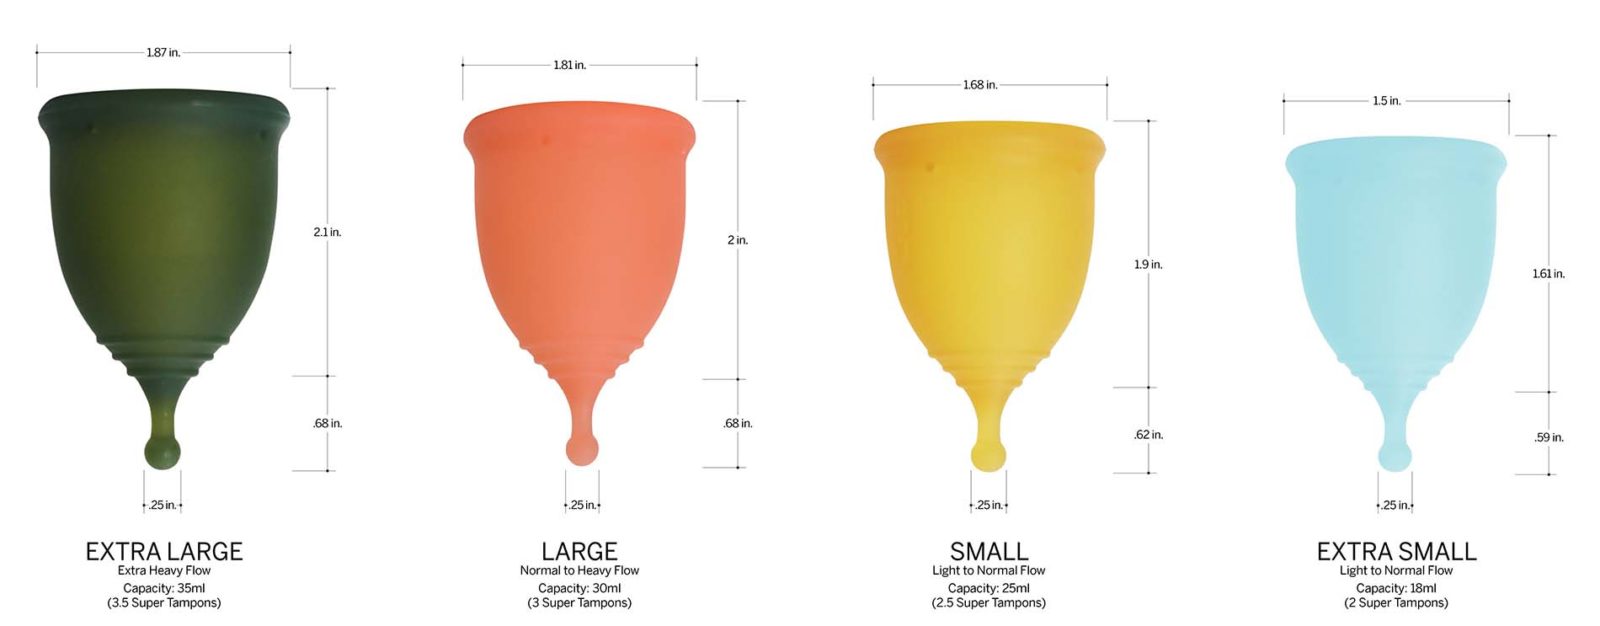 Menstrual cup size chart: Find your size!